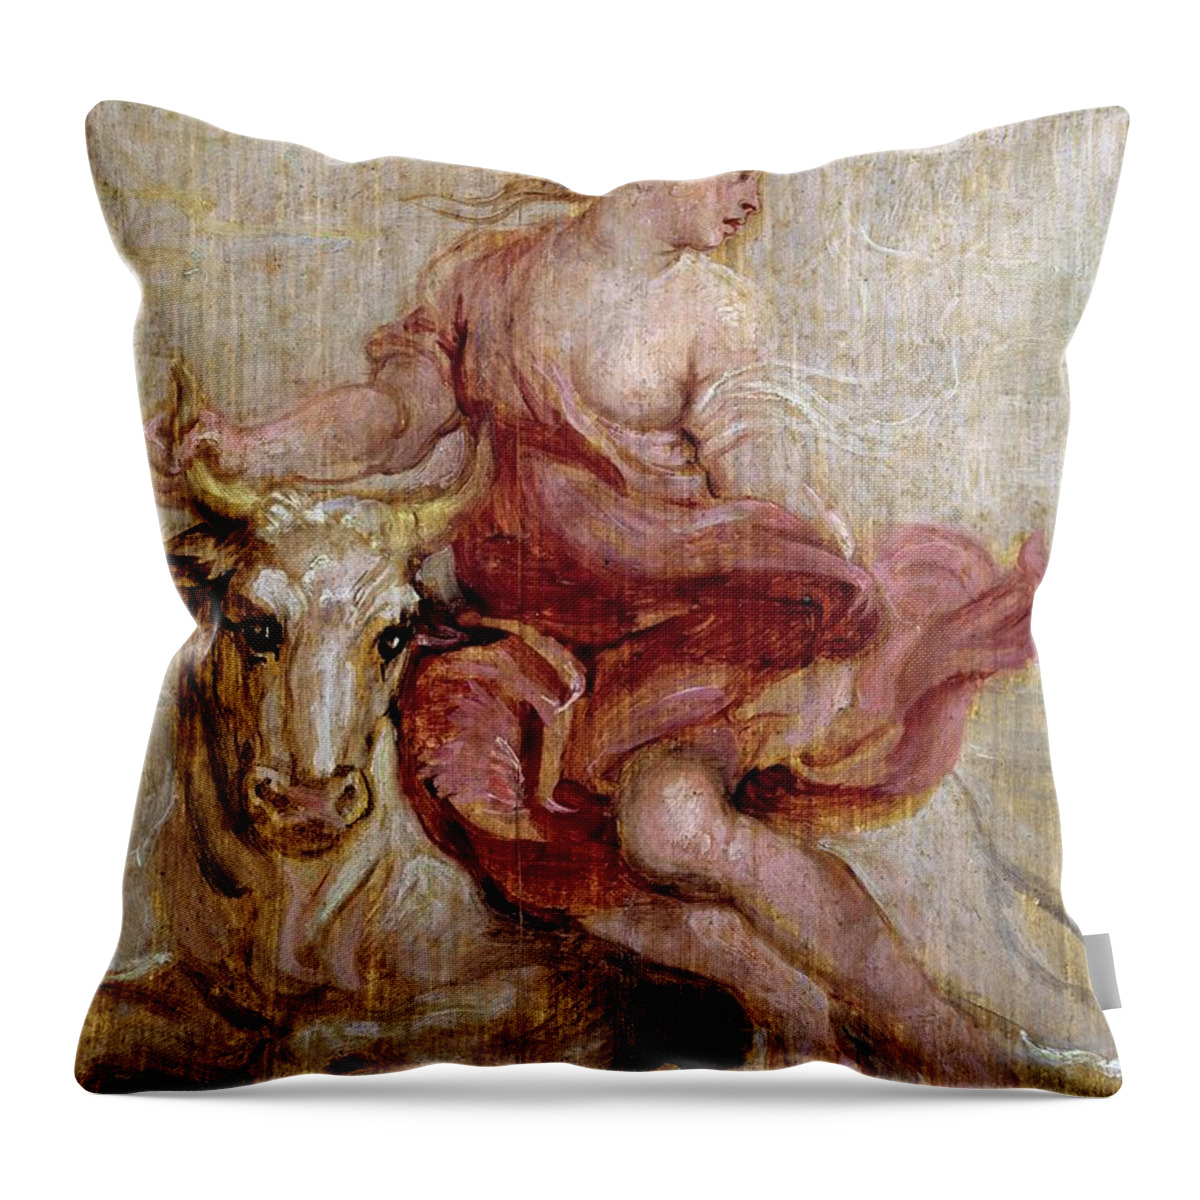 Europa Throw Pillow featuring the painting Pedro Pablo Rubens / 'The Rape of Europe', 1636-1637, Flemish School. Europa. by Peter Paul Rubens -1577-1640-